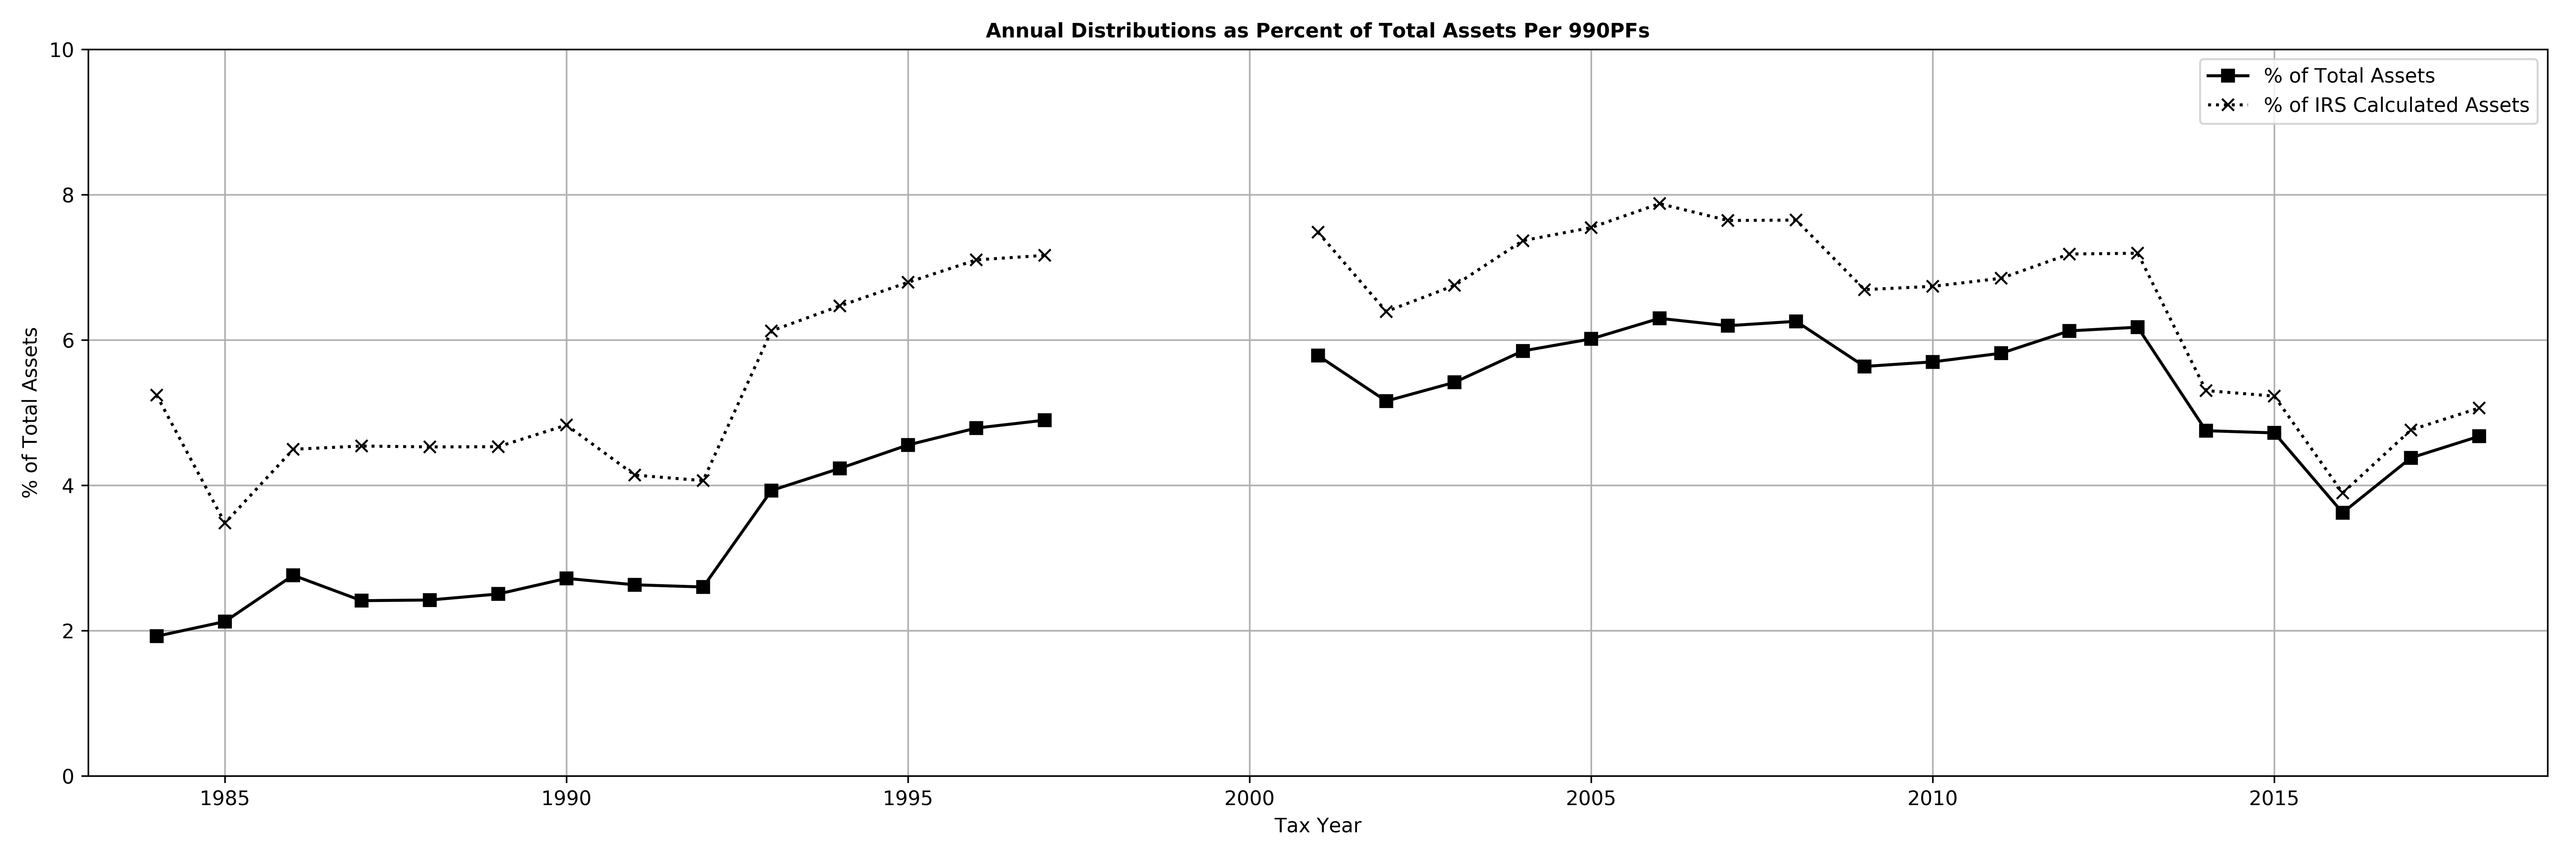 IRS Calculated Distributions as Percent of Assets